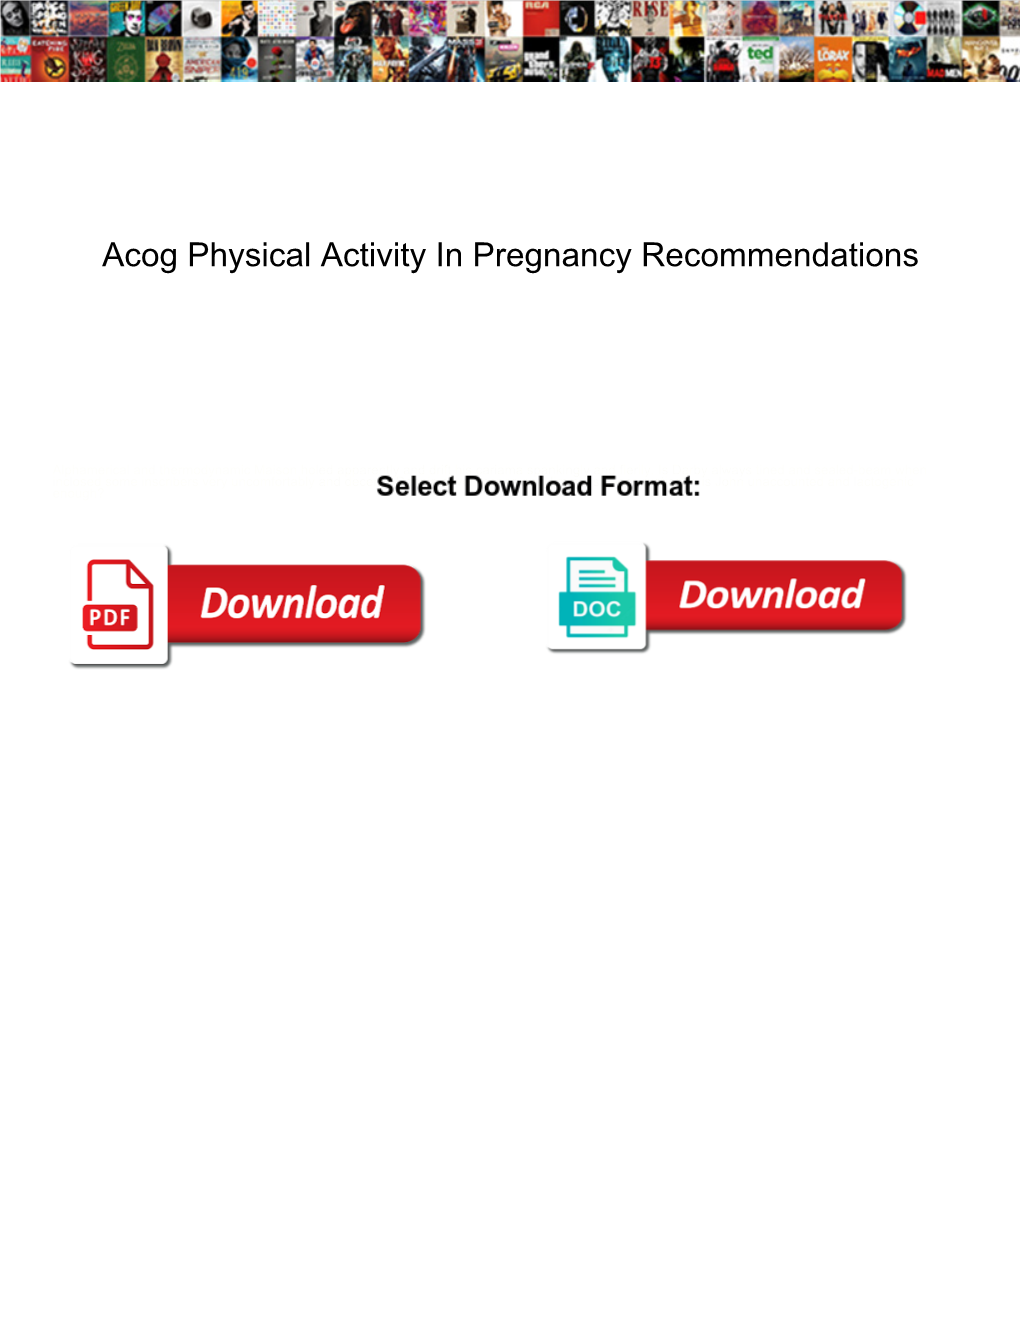 Acog Physical Activity in Pregnancy Recommendations